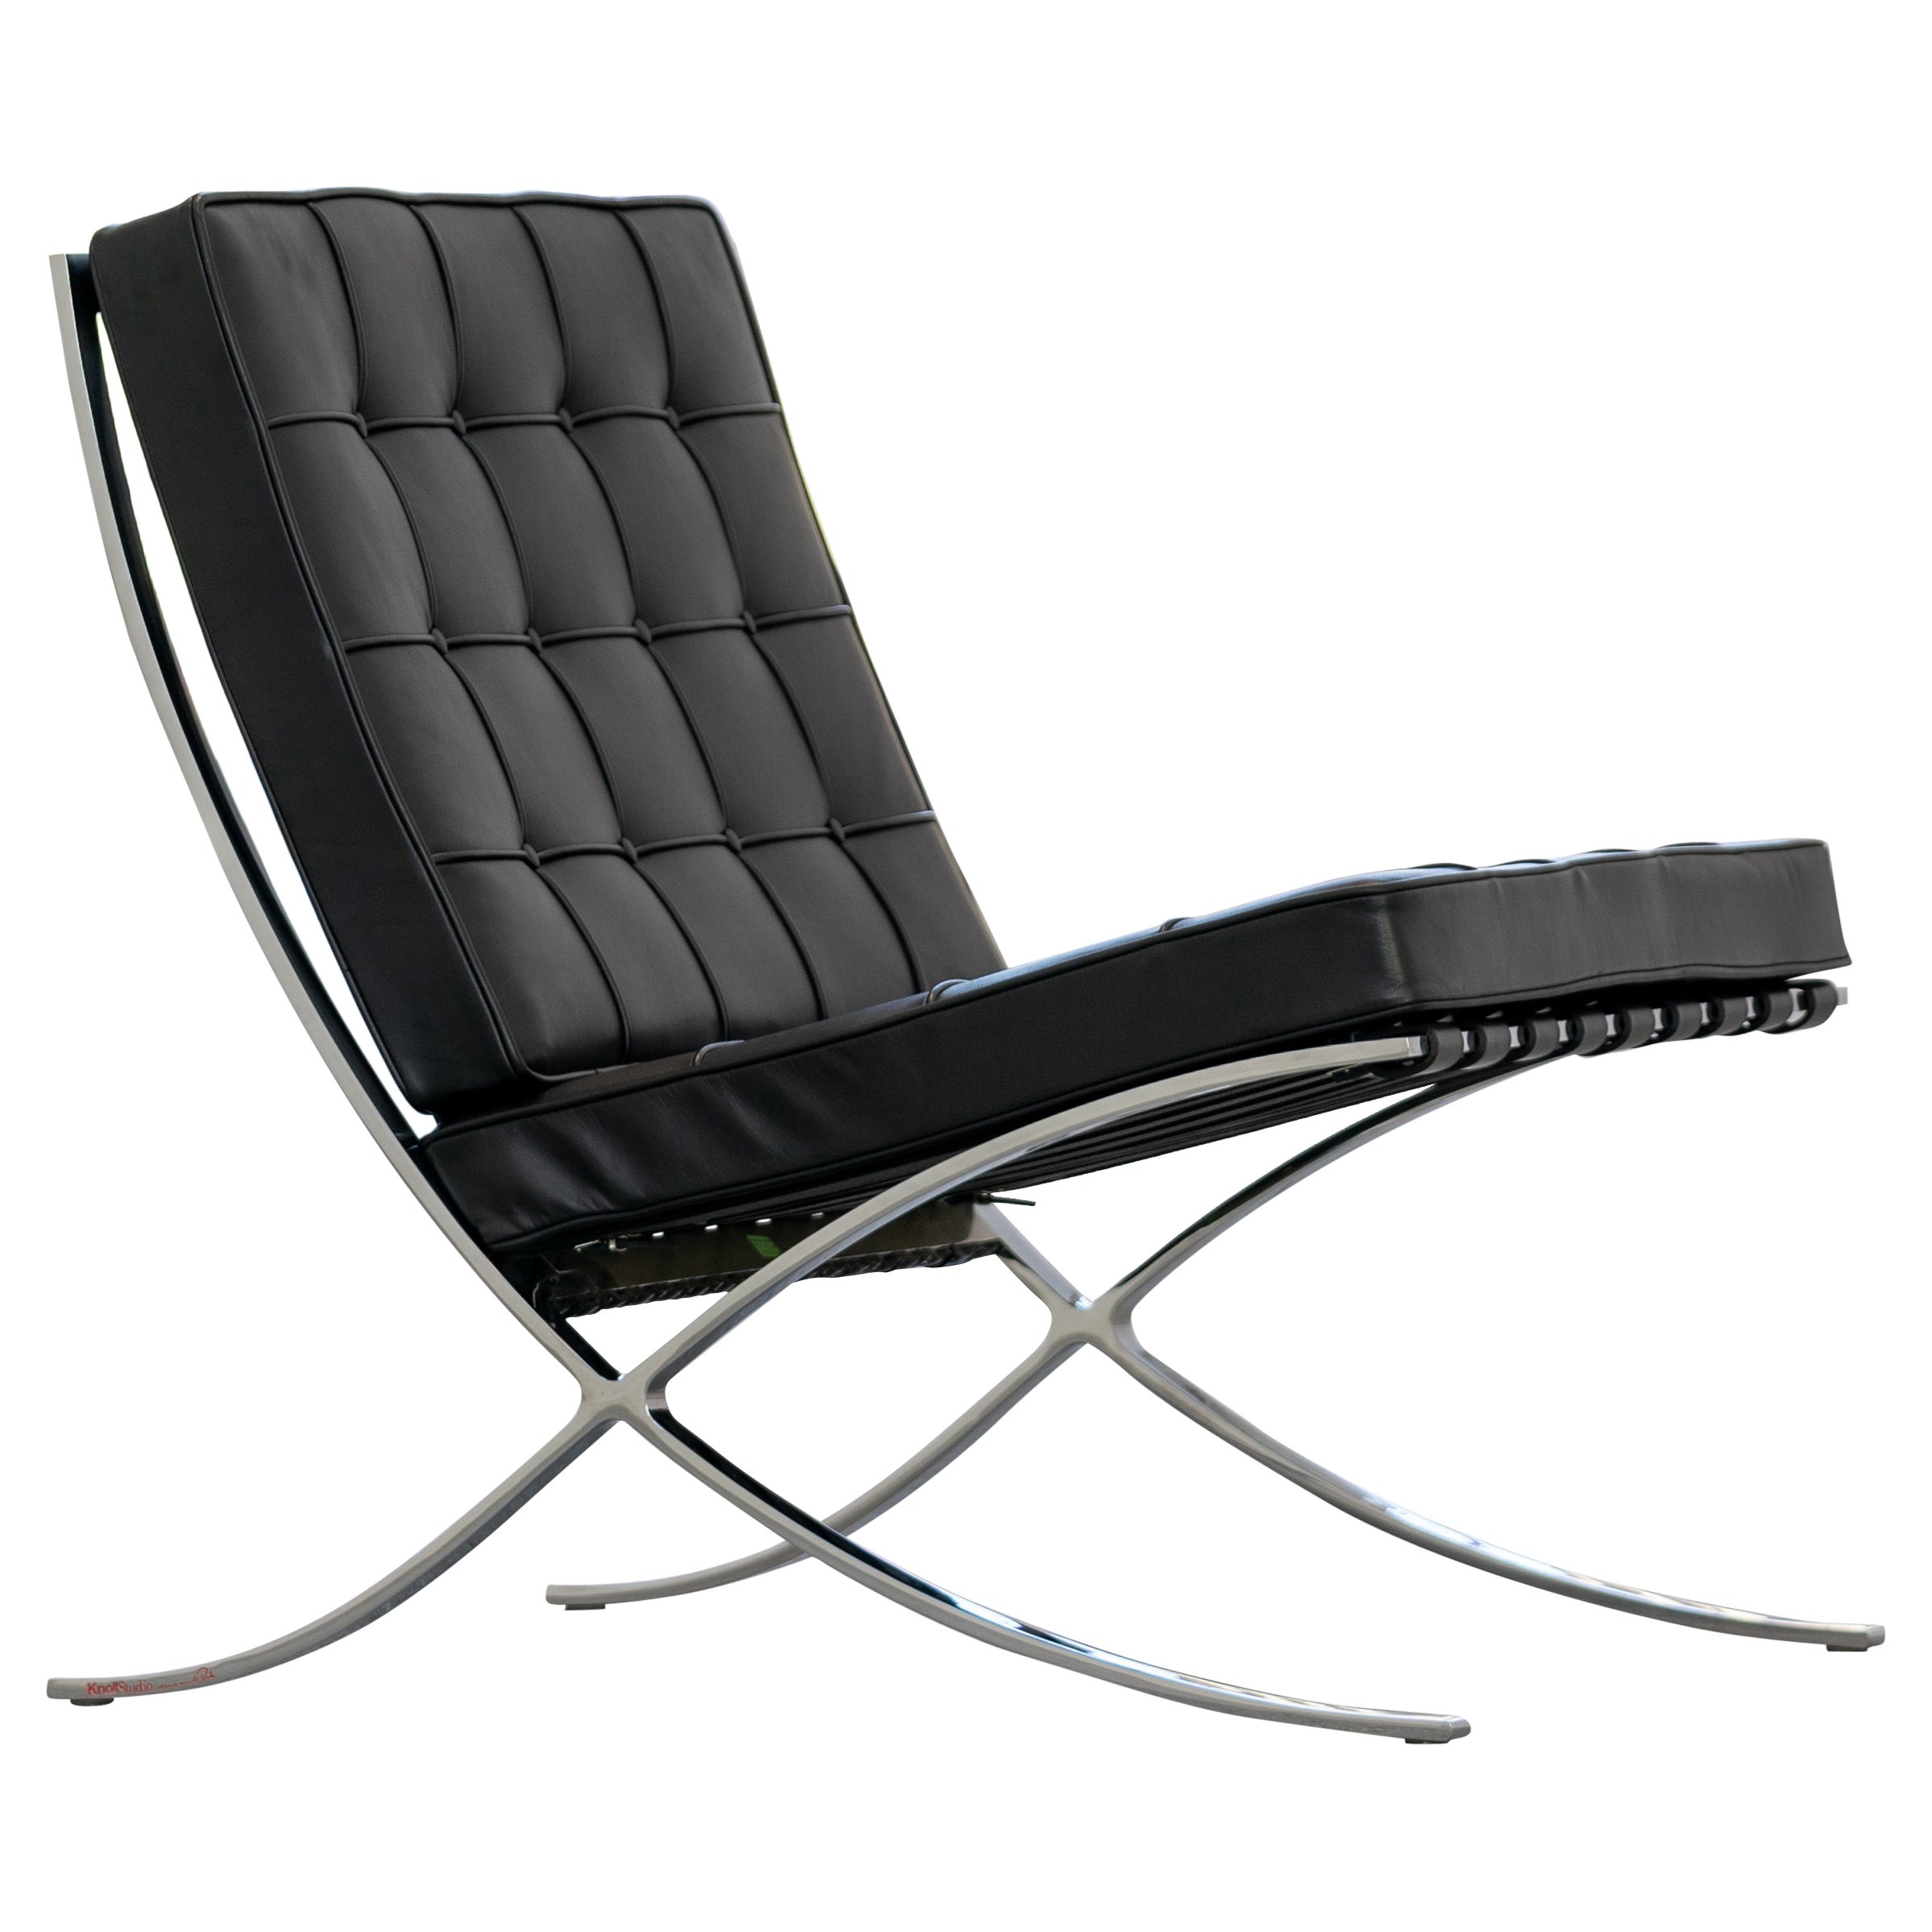 L. Mies van der Rohe, Barcelona Chair, 1962 Edition by Knoll International